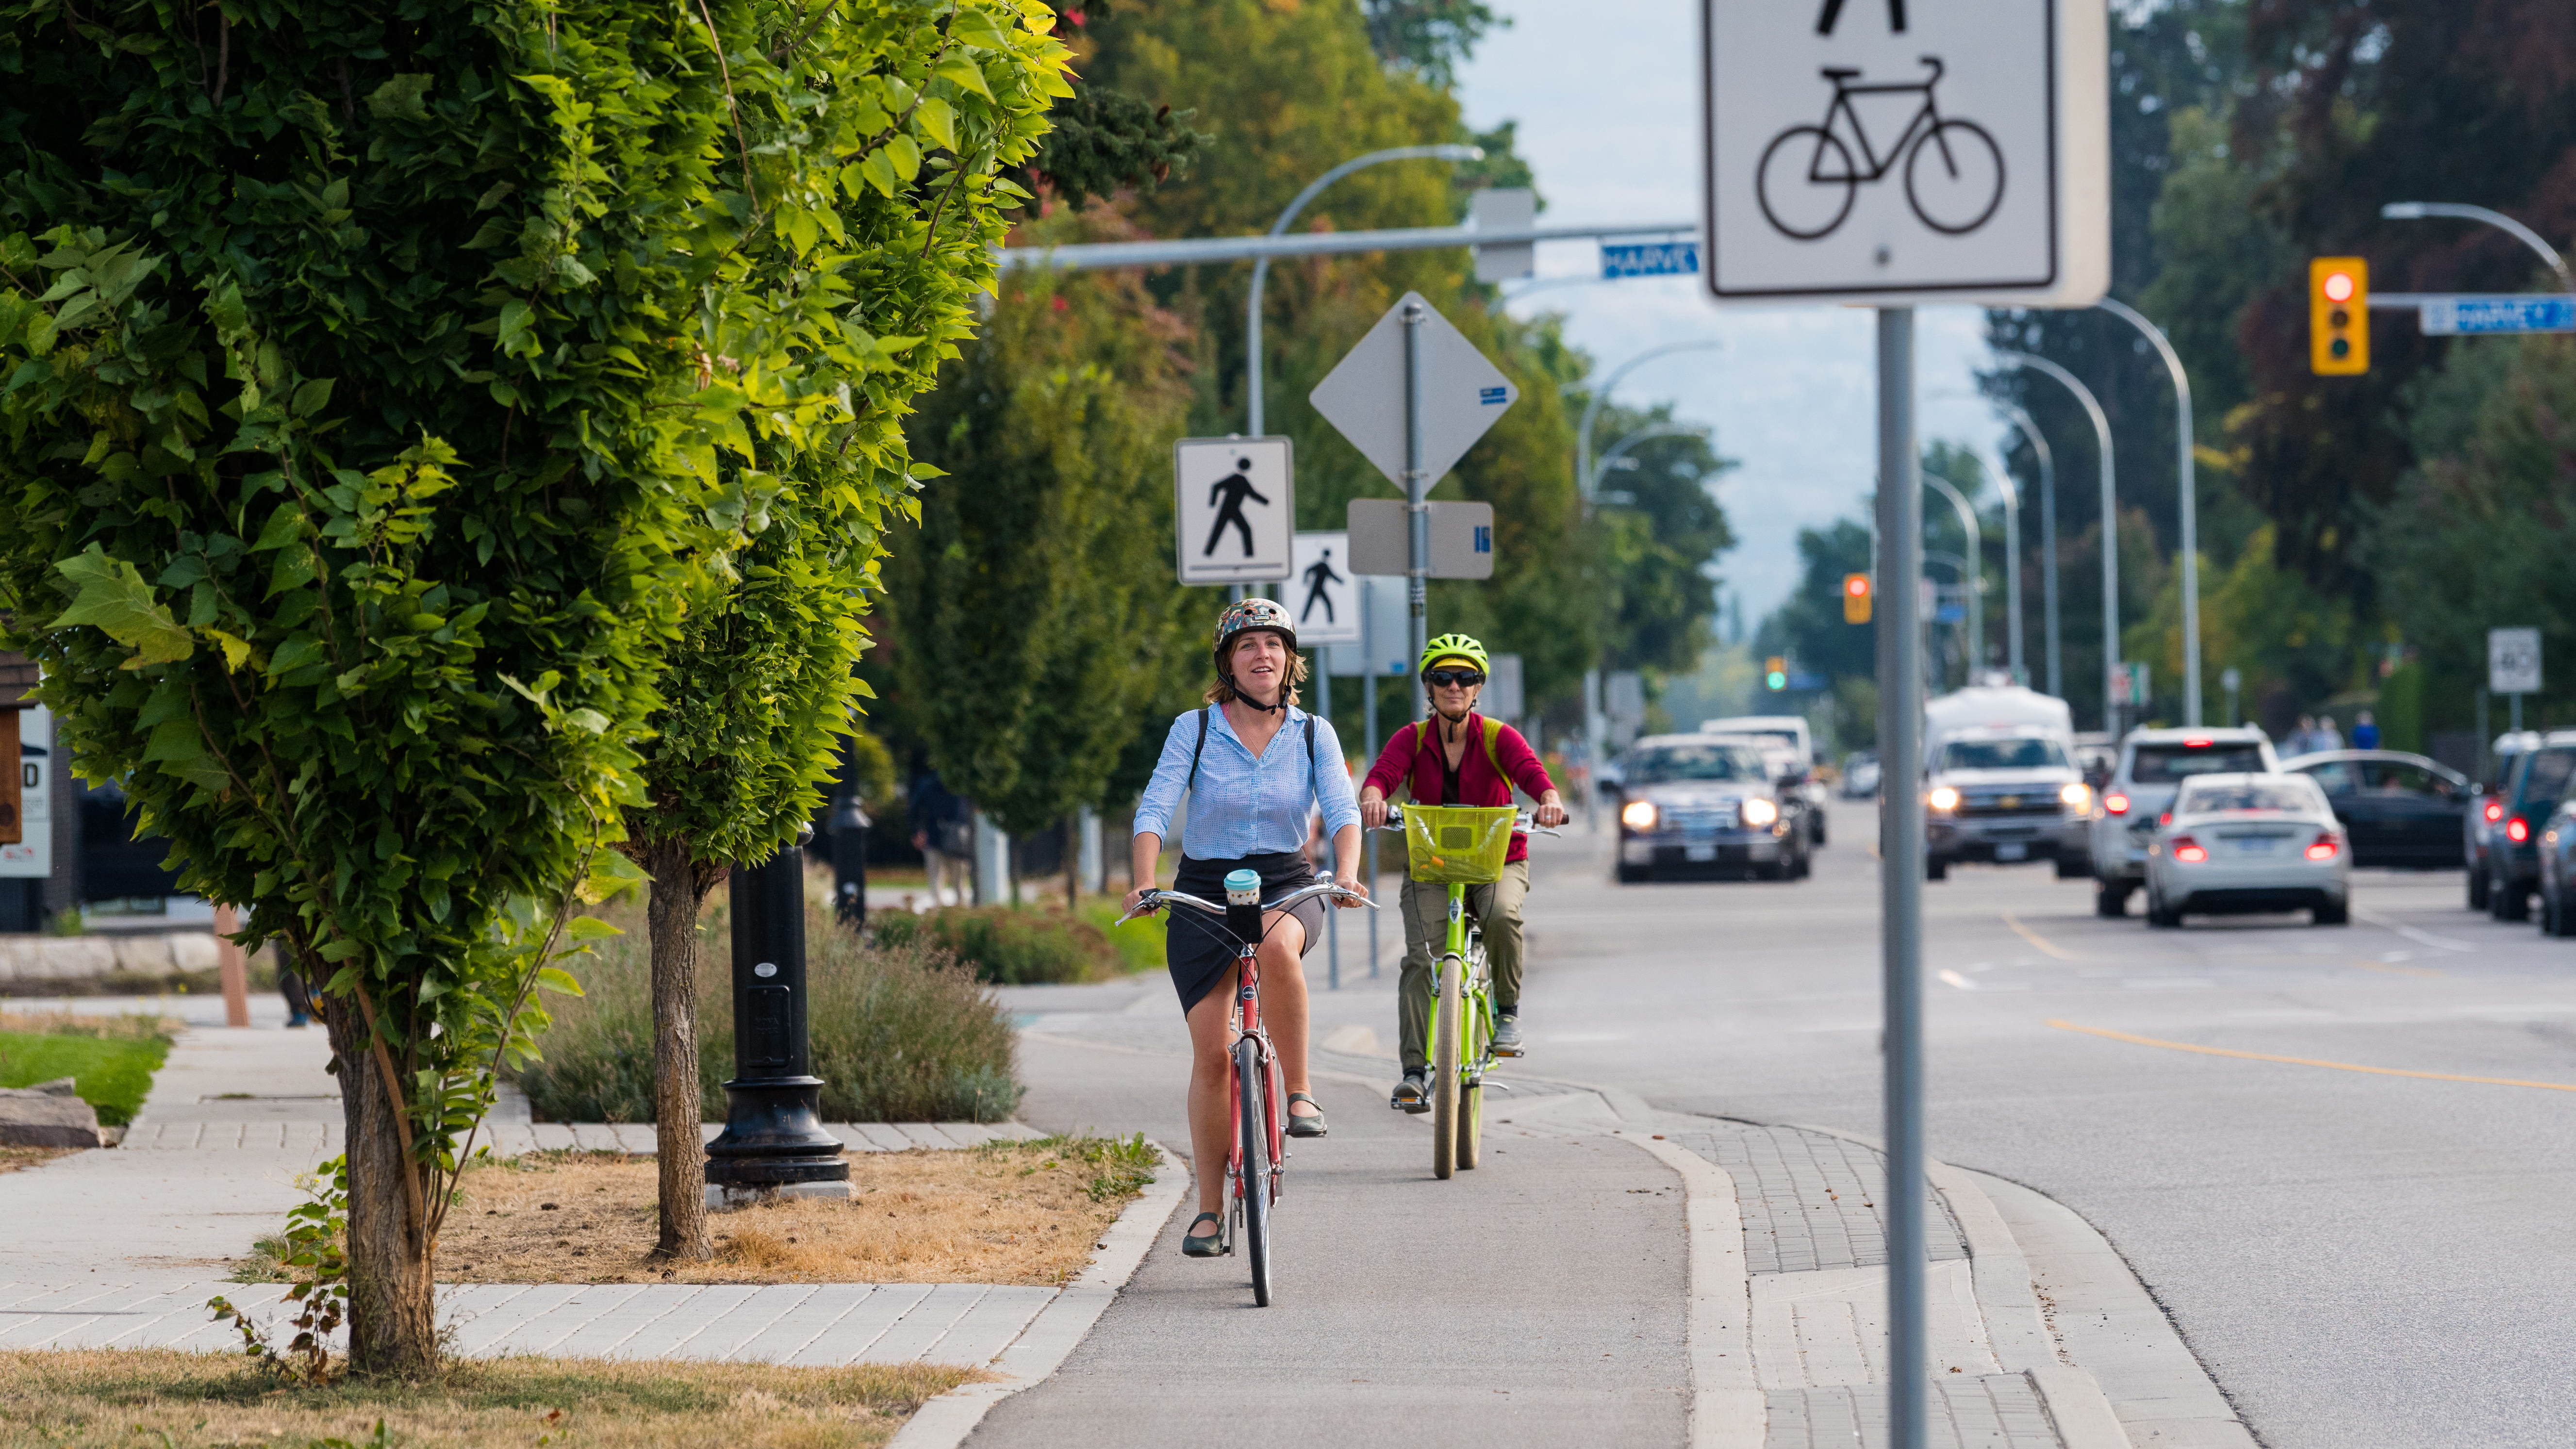 Growing Kelowna without gridlock, new transportation options